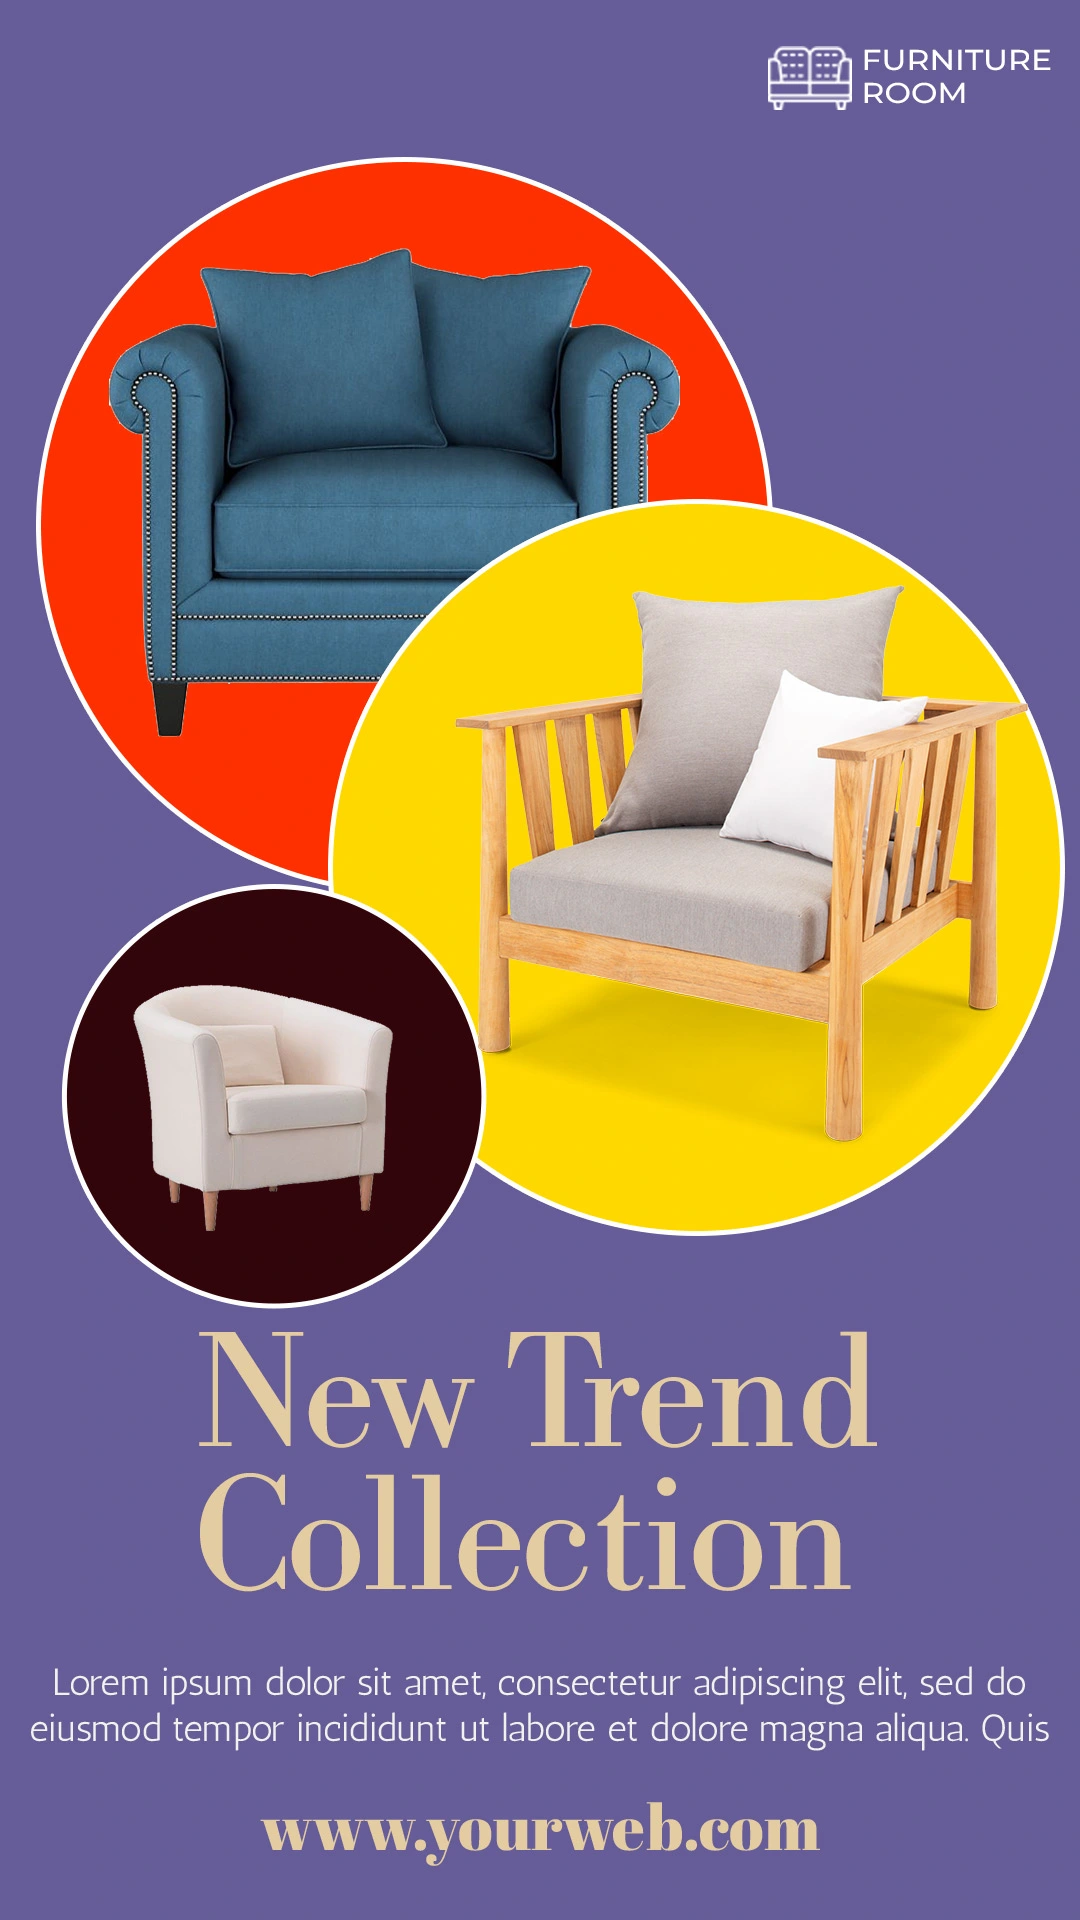 Promote your furniture sofa with social media story templates